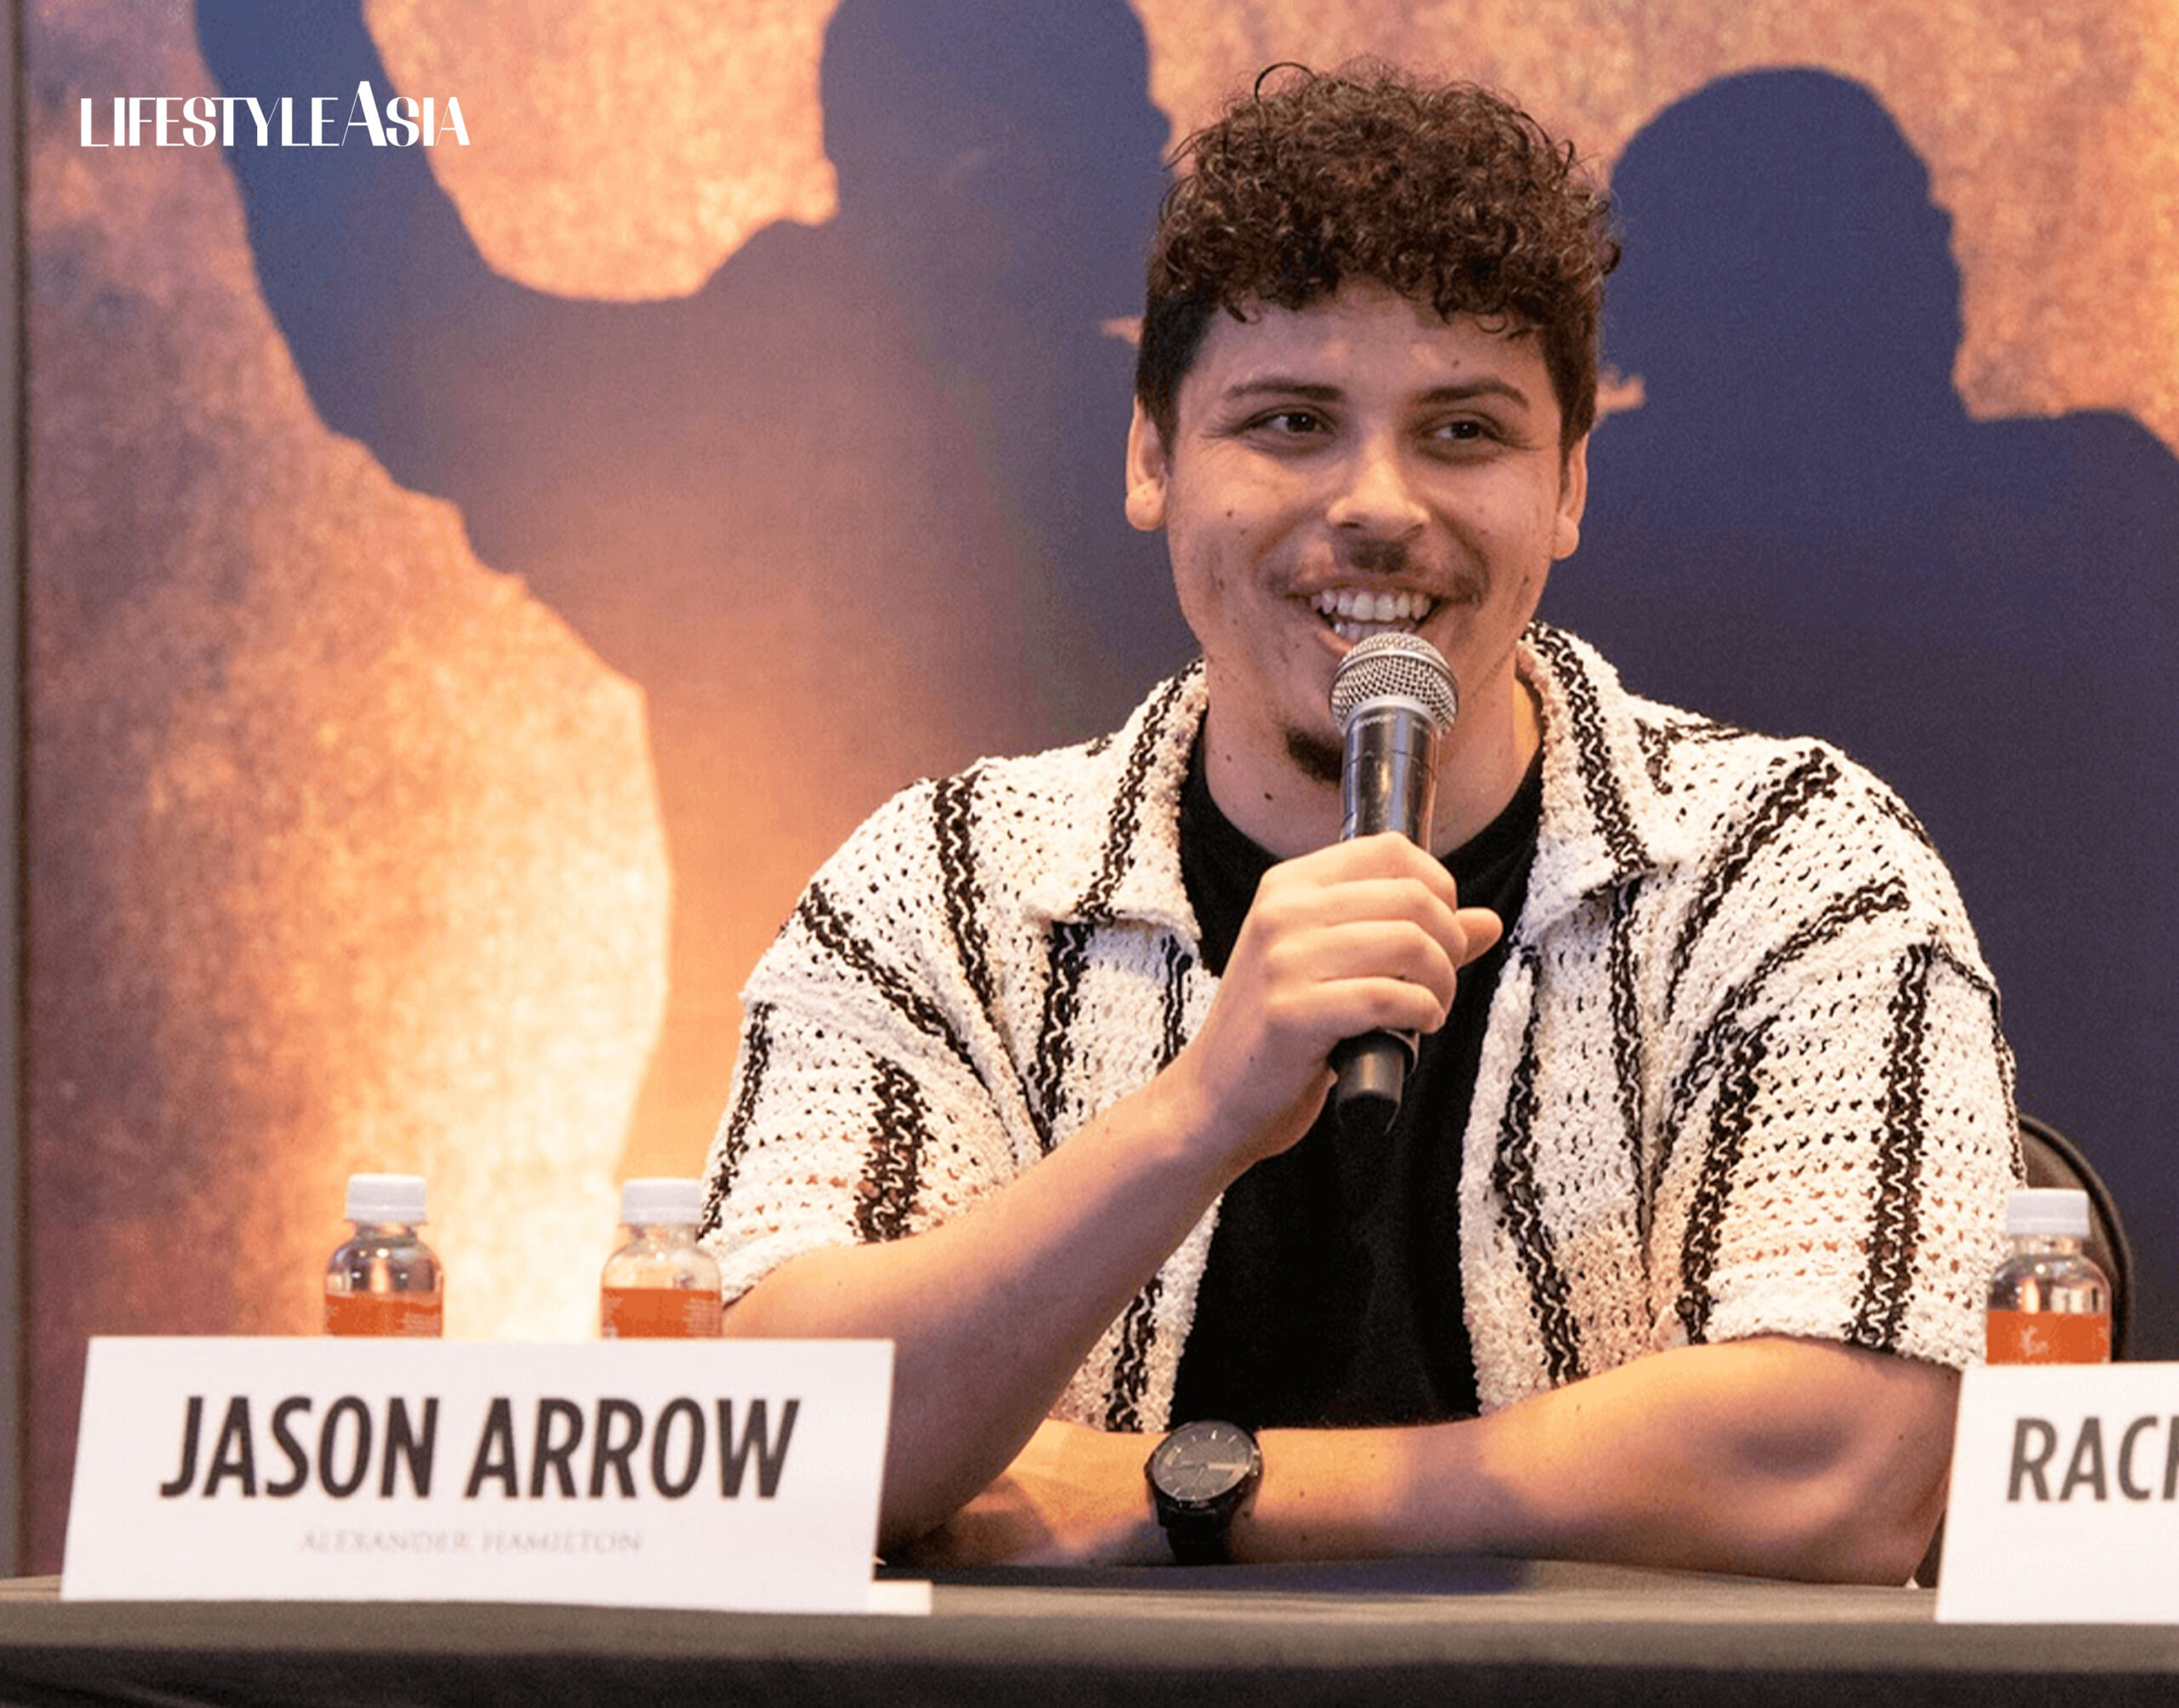 Jason Arrow during the press conference